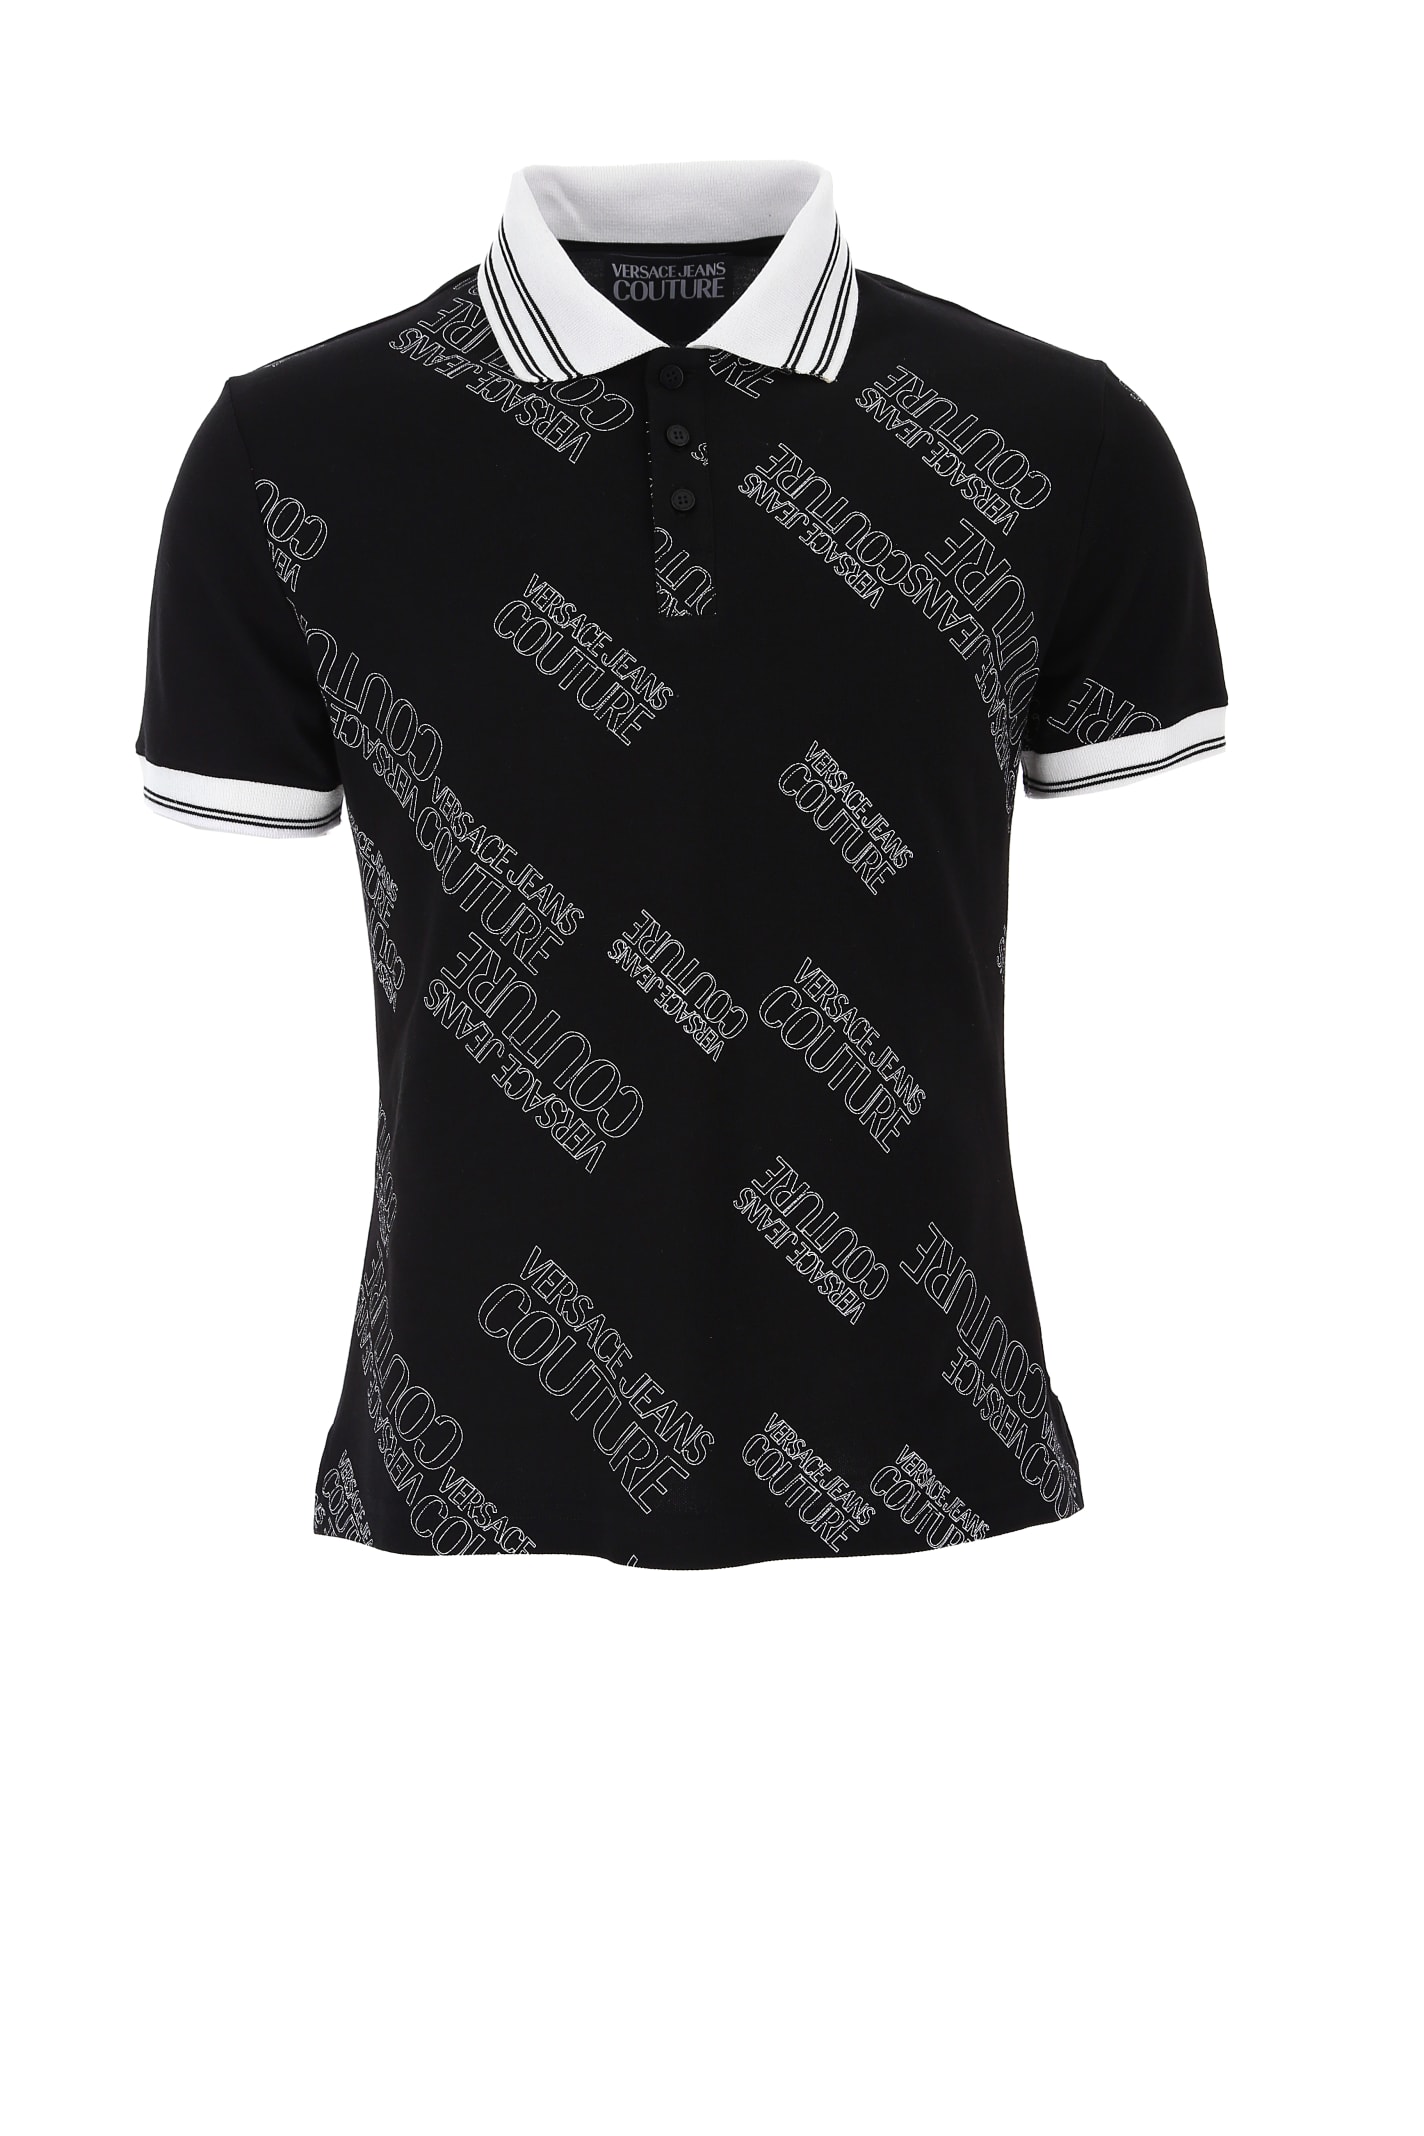 Versace Jeans Couture Polo T.shirt 72up621 Slim Cont Print Logo Piquet Print New Logo In Black